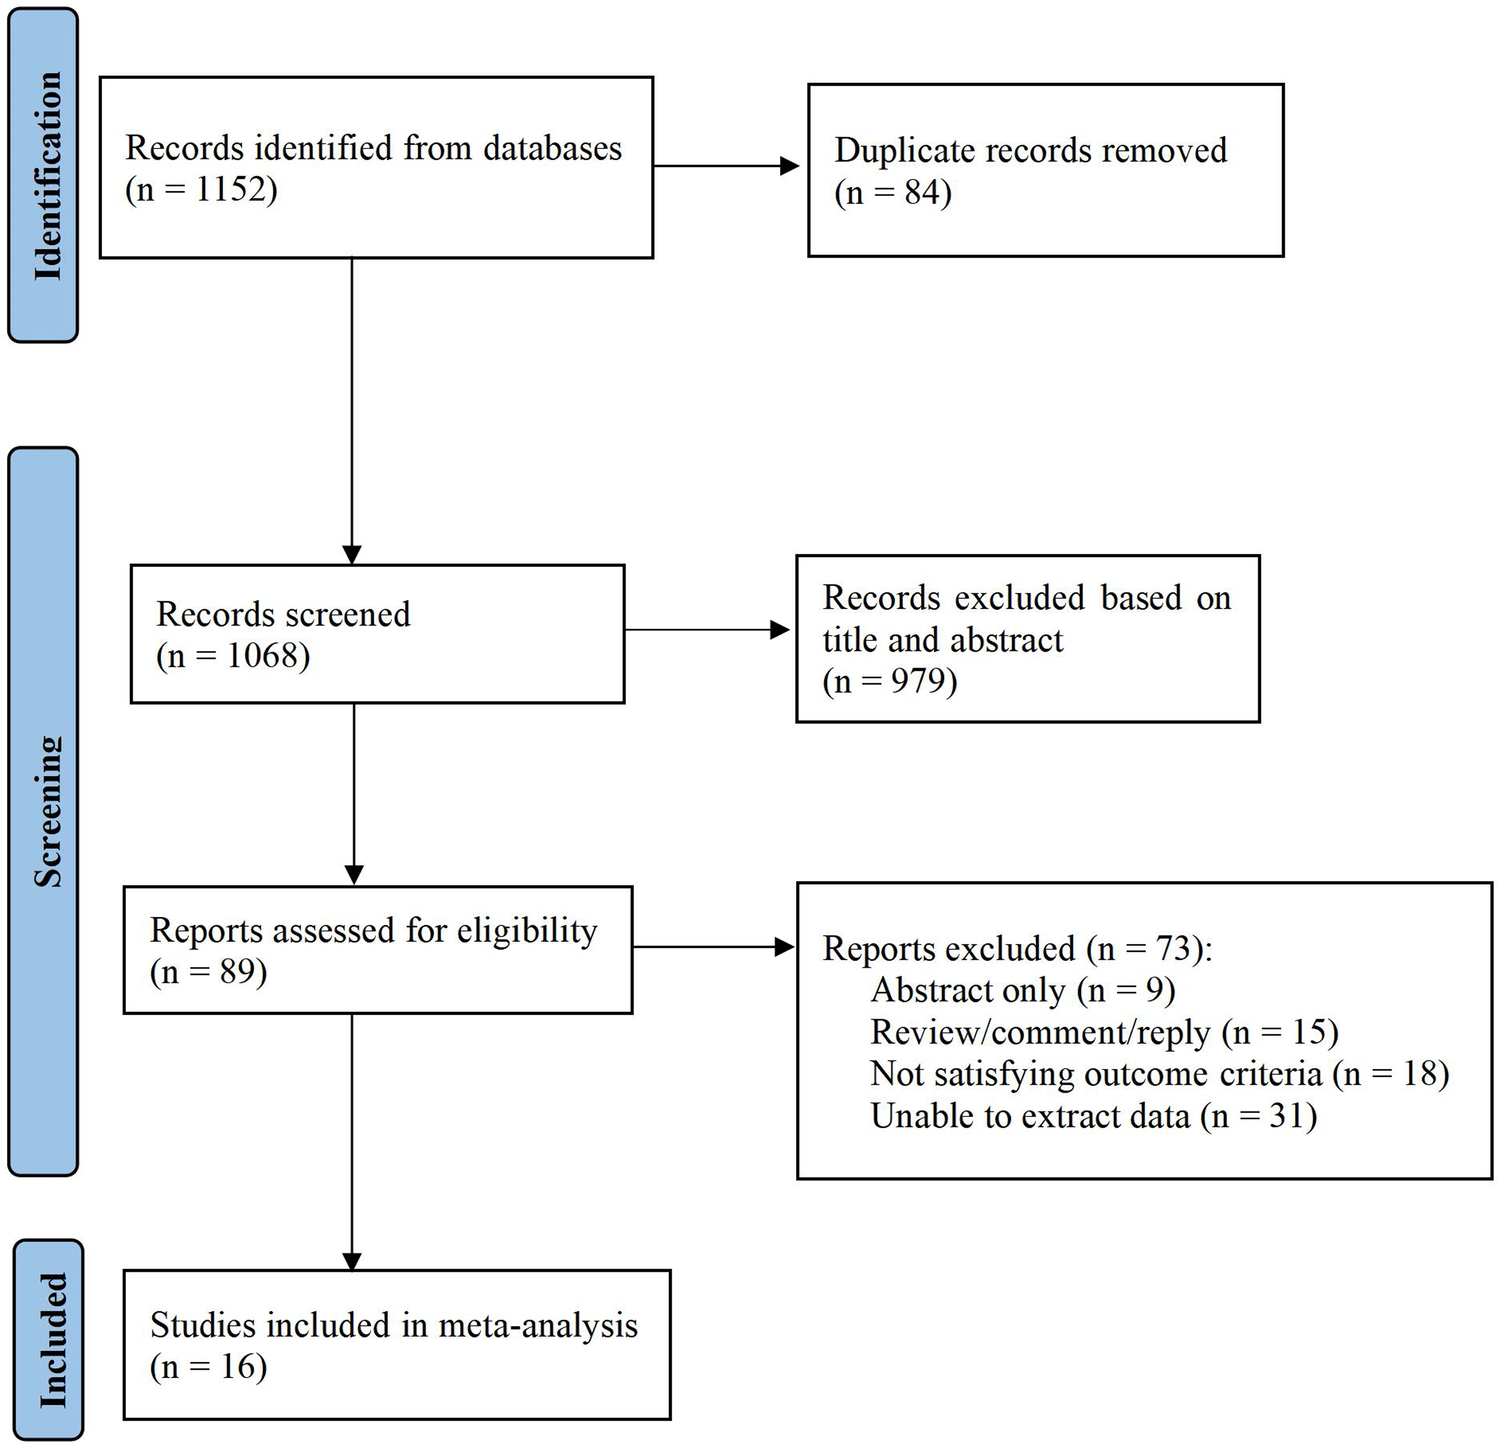 Comparison of efficacy and safety of different minimally invasive therapies for thyroid nodules: A network meta-analysis